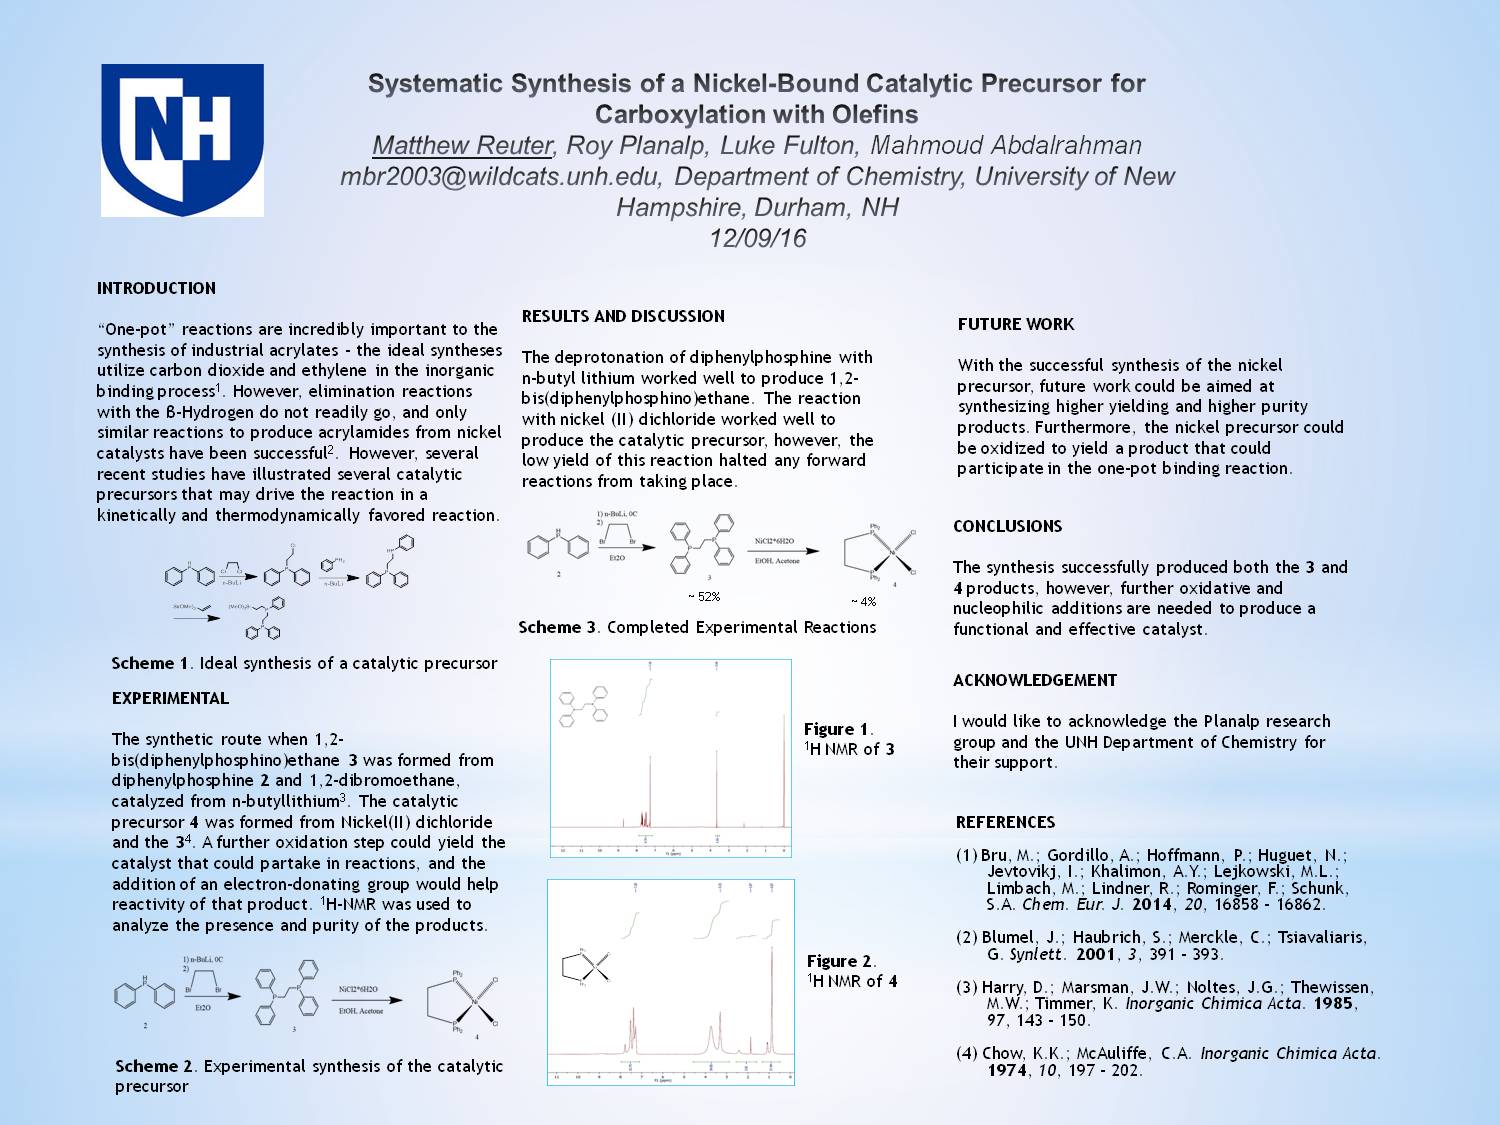 Systematic Synthesis Of A Nickel-Bound Catalytic Precursor For Carboxylation With Olefins by mbr2003